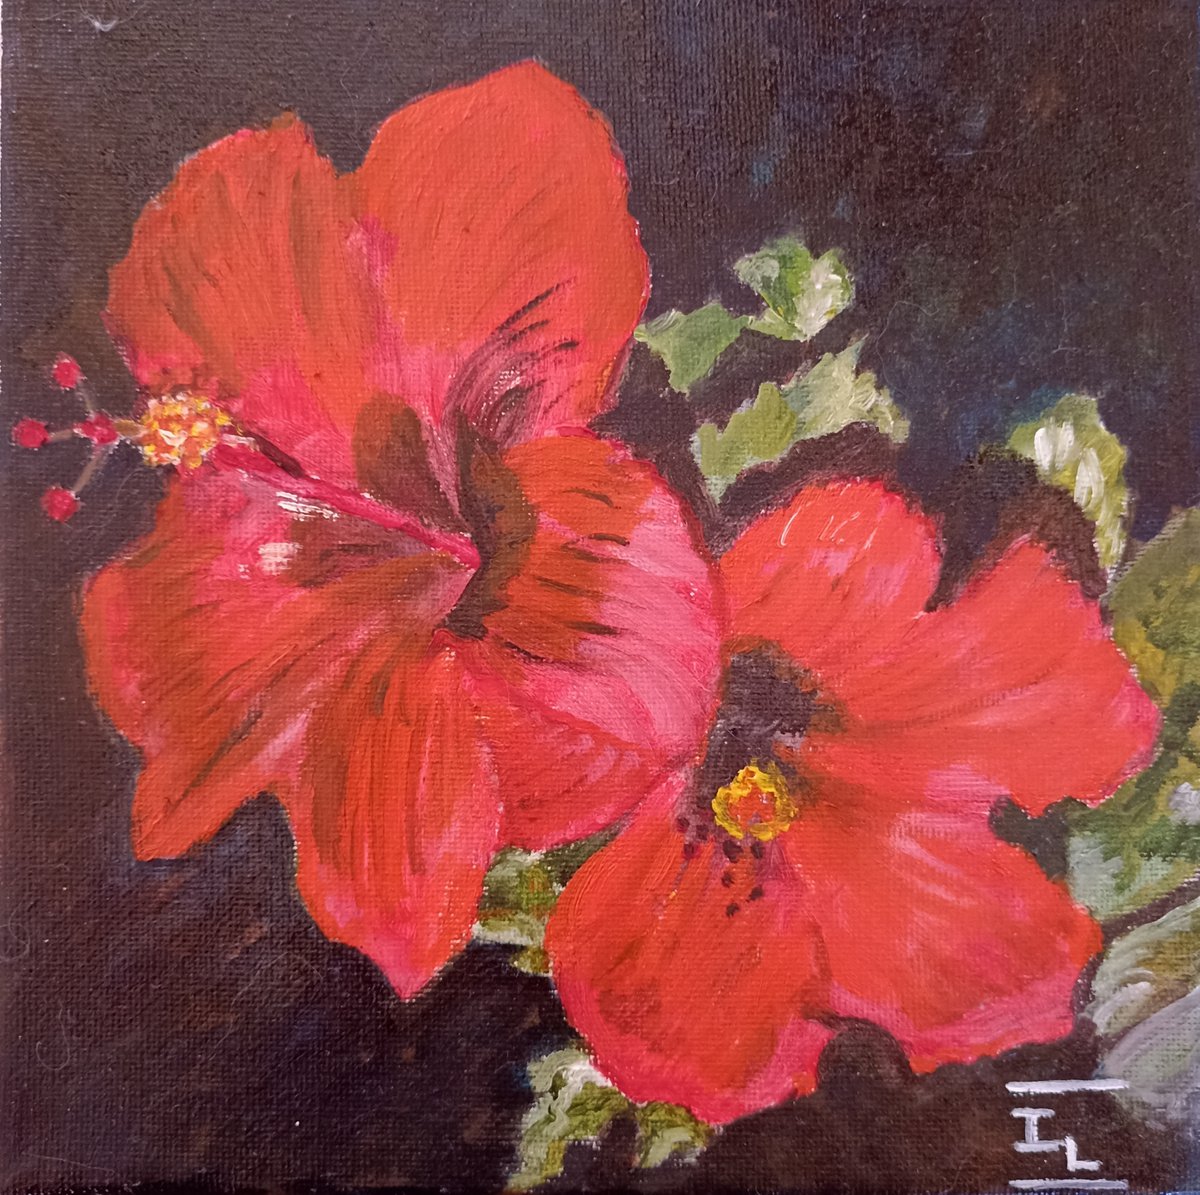 Hibiscus flowers by Isabelle Lucas